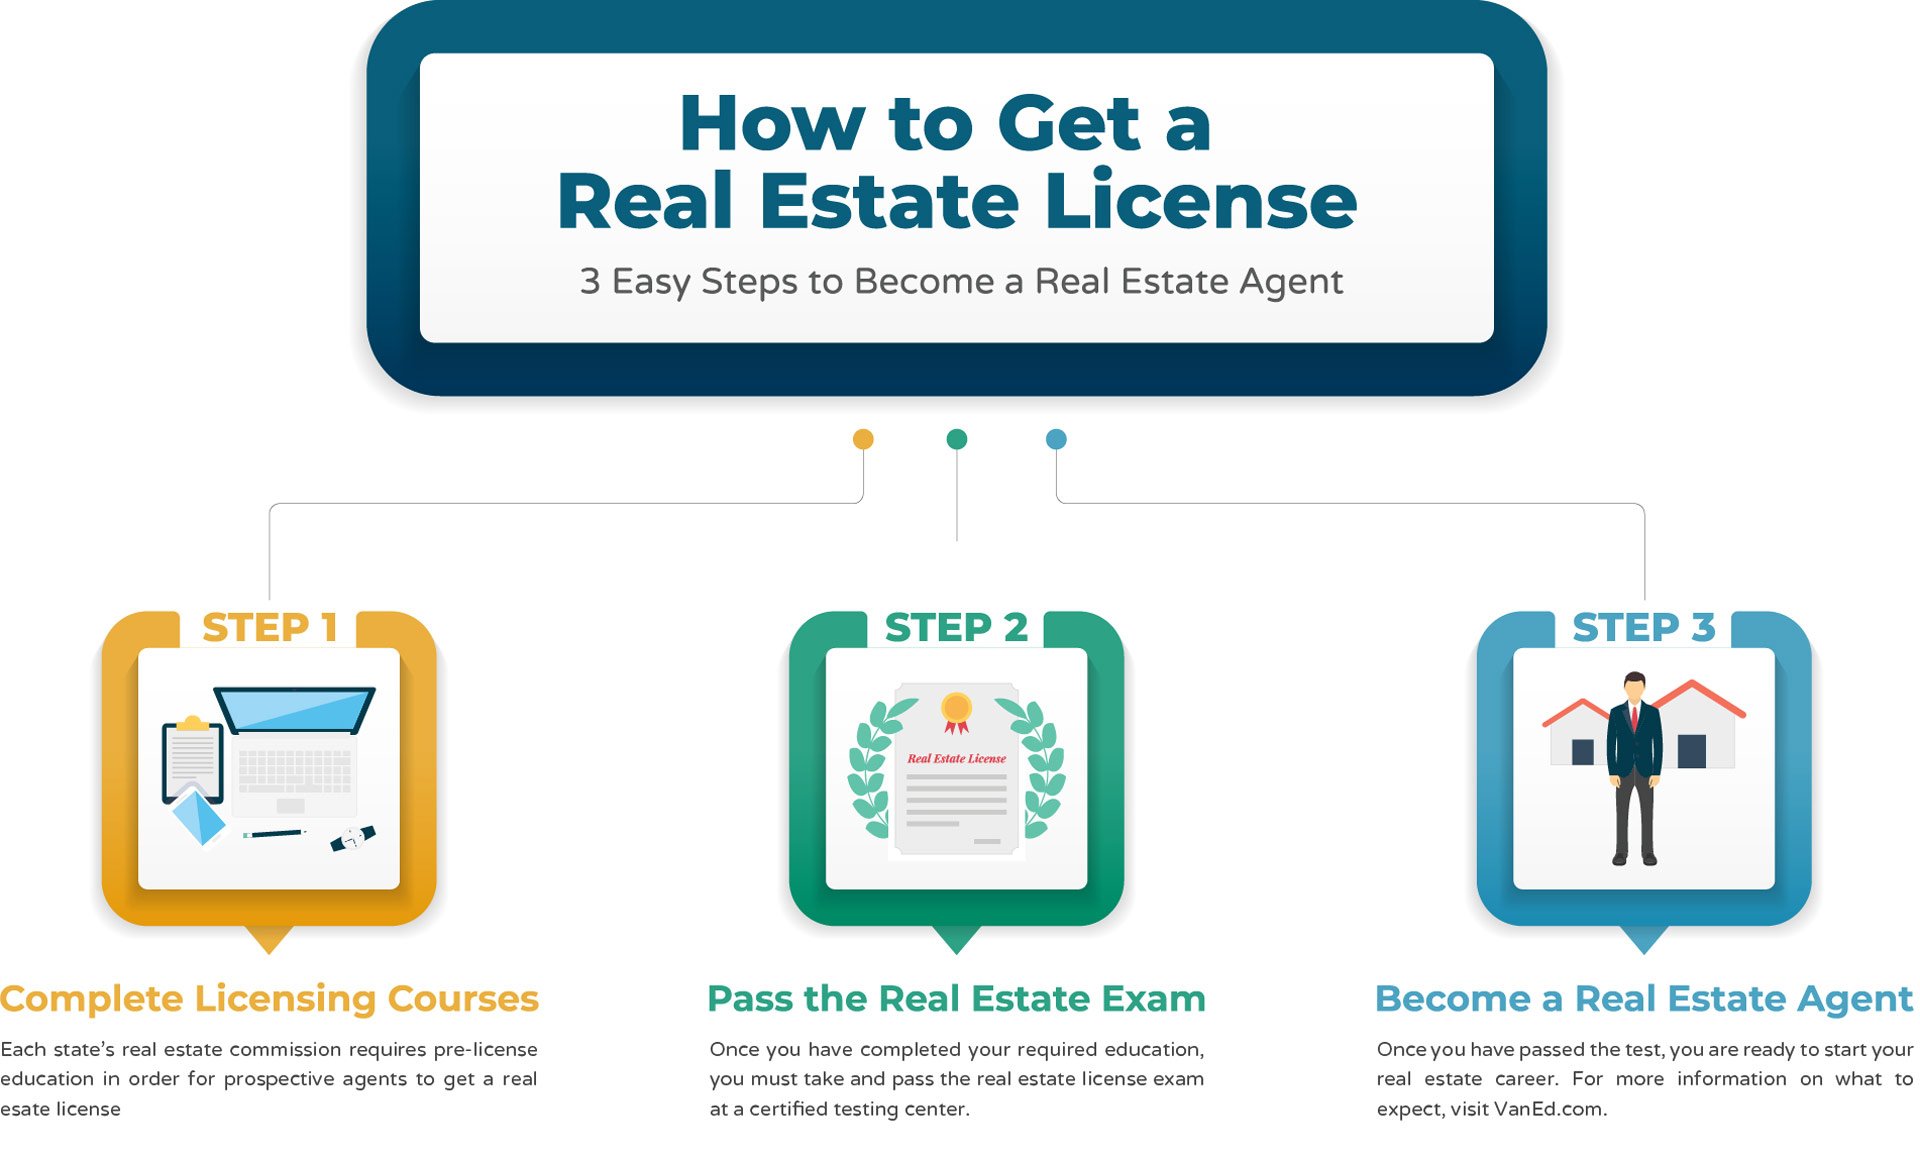 How to get my real estate license in kentucky